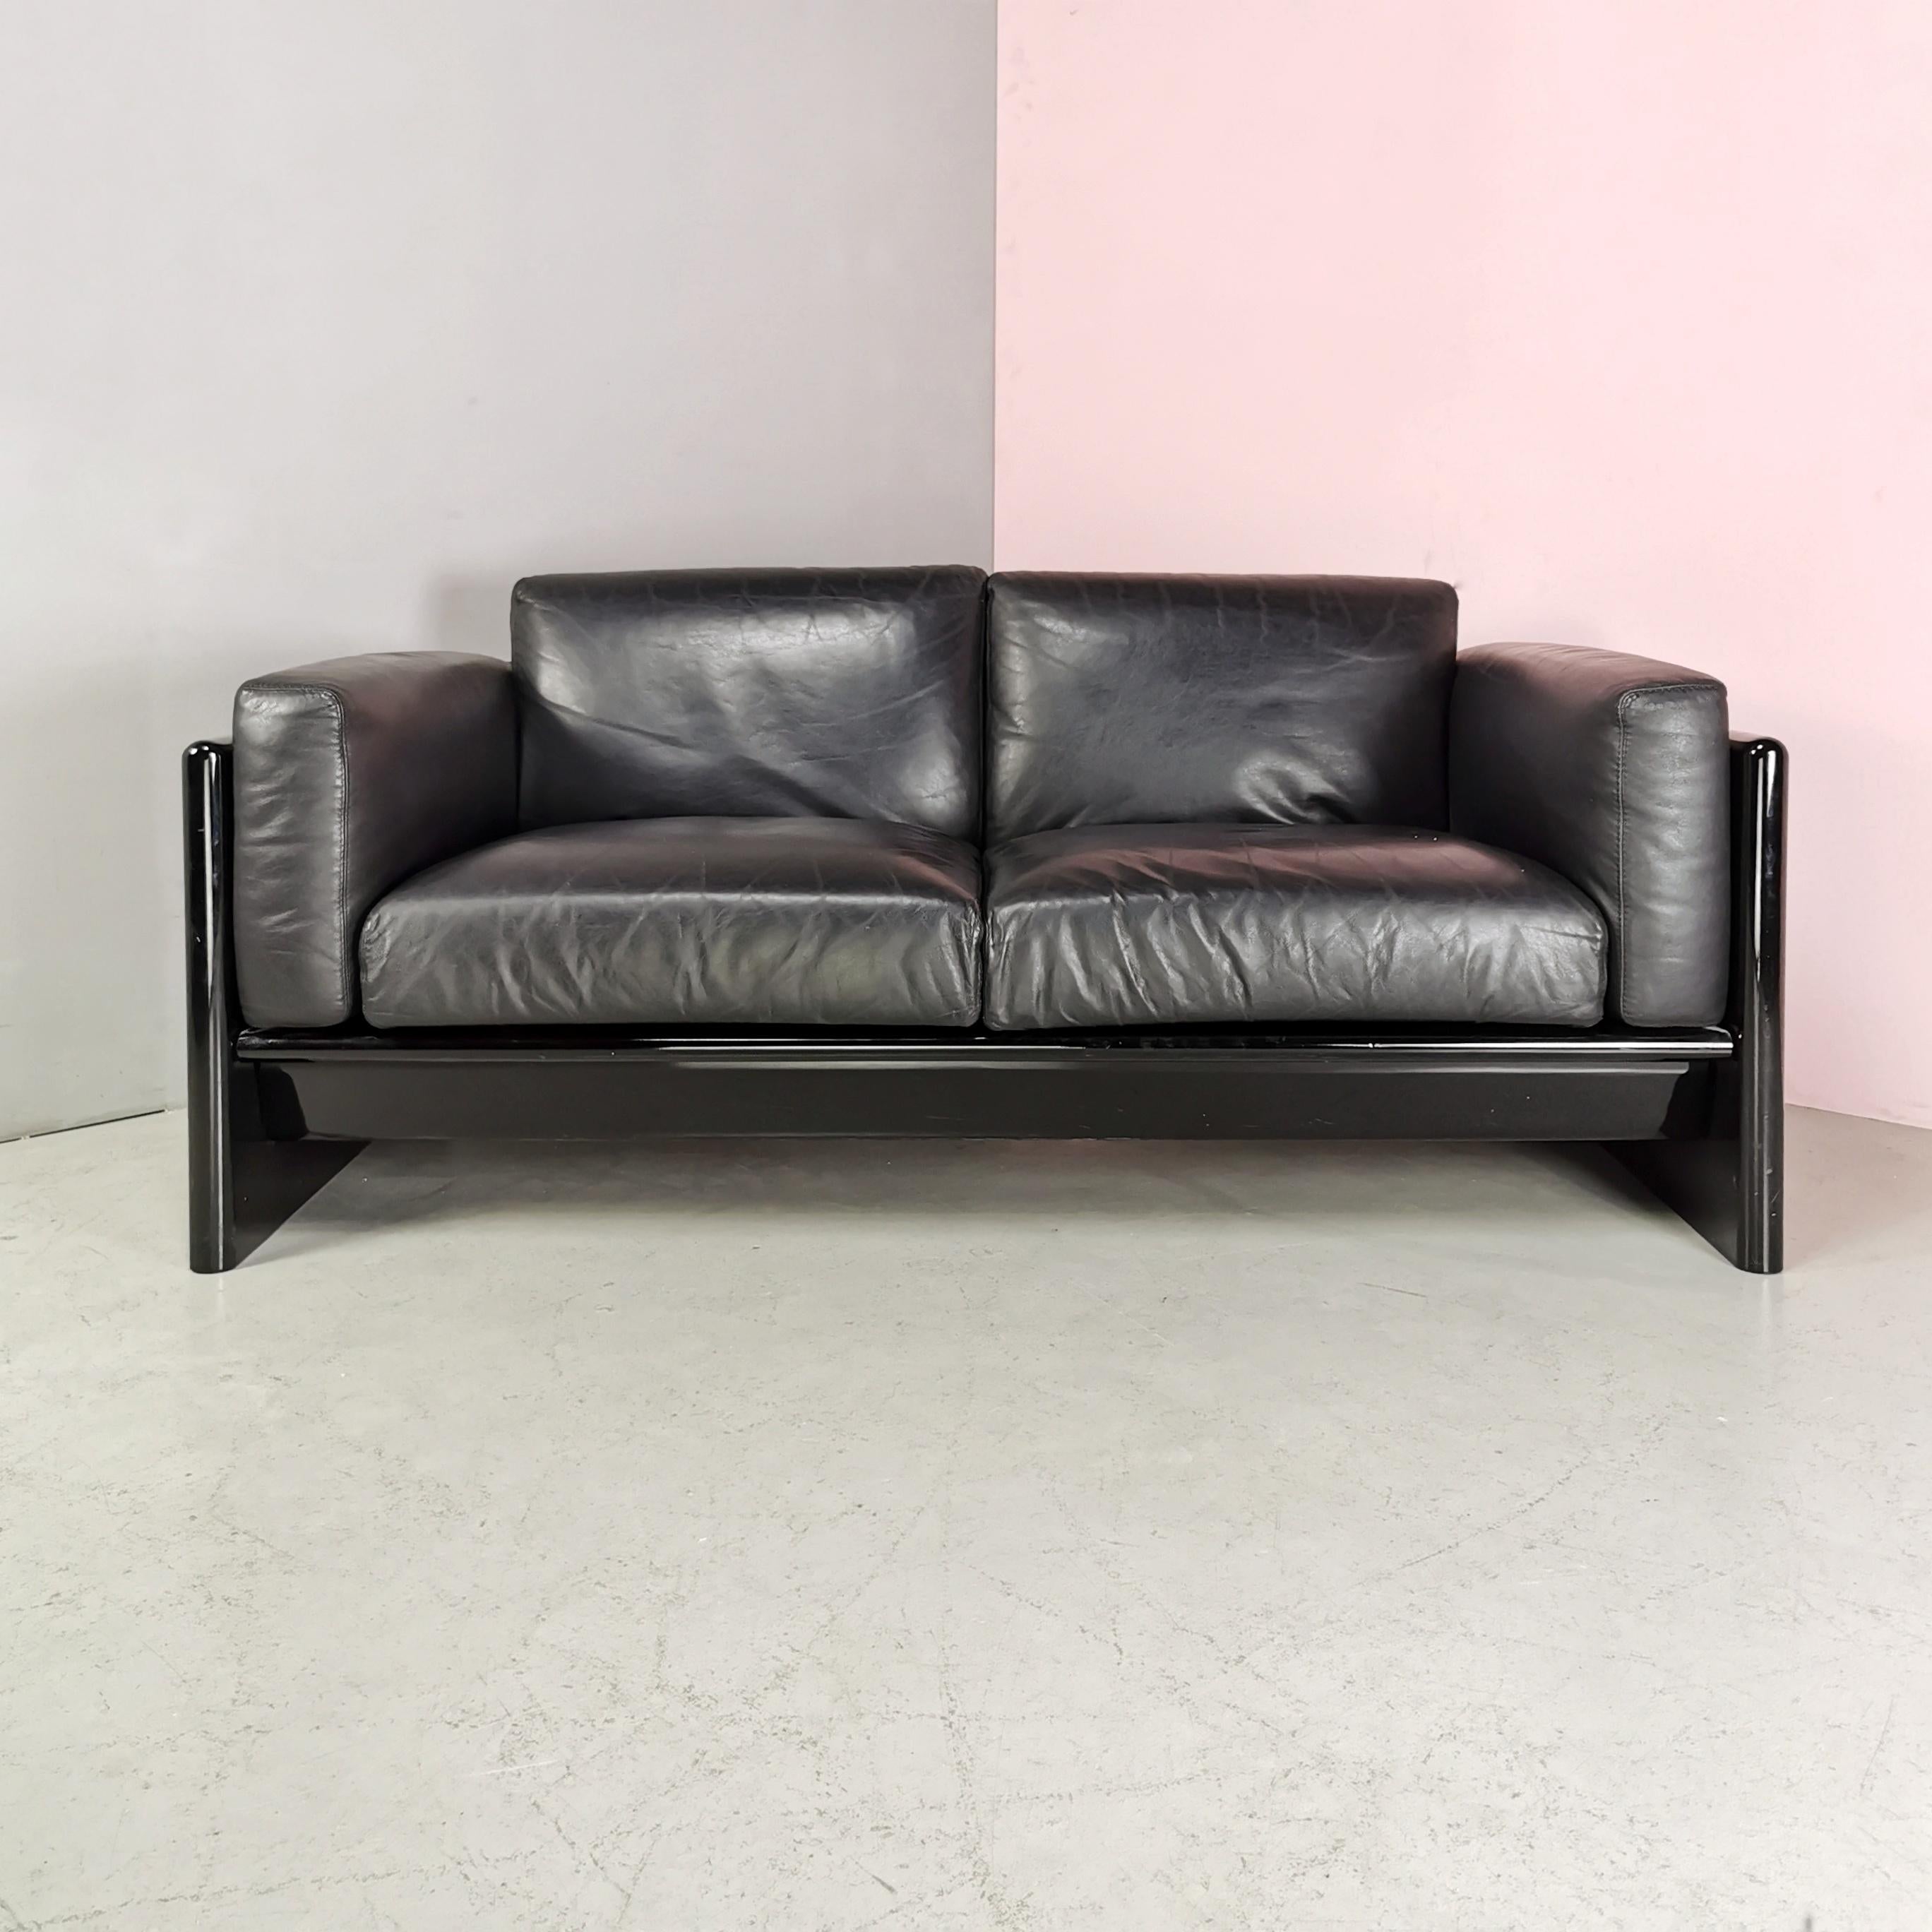 sofa part of the collection of furniture produced by Gavina belonging to the Studio Simon collection.
the fully lacquered frame make it a very elegant sofa even as a centerpiece considering that it is lacquered and finely finished back as well.
has